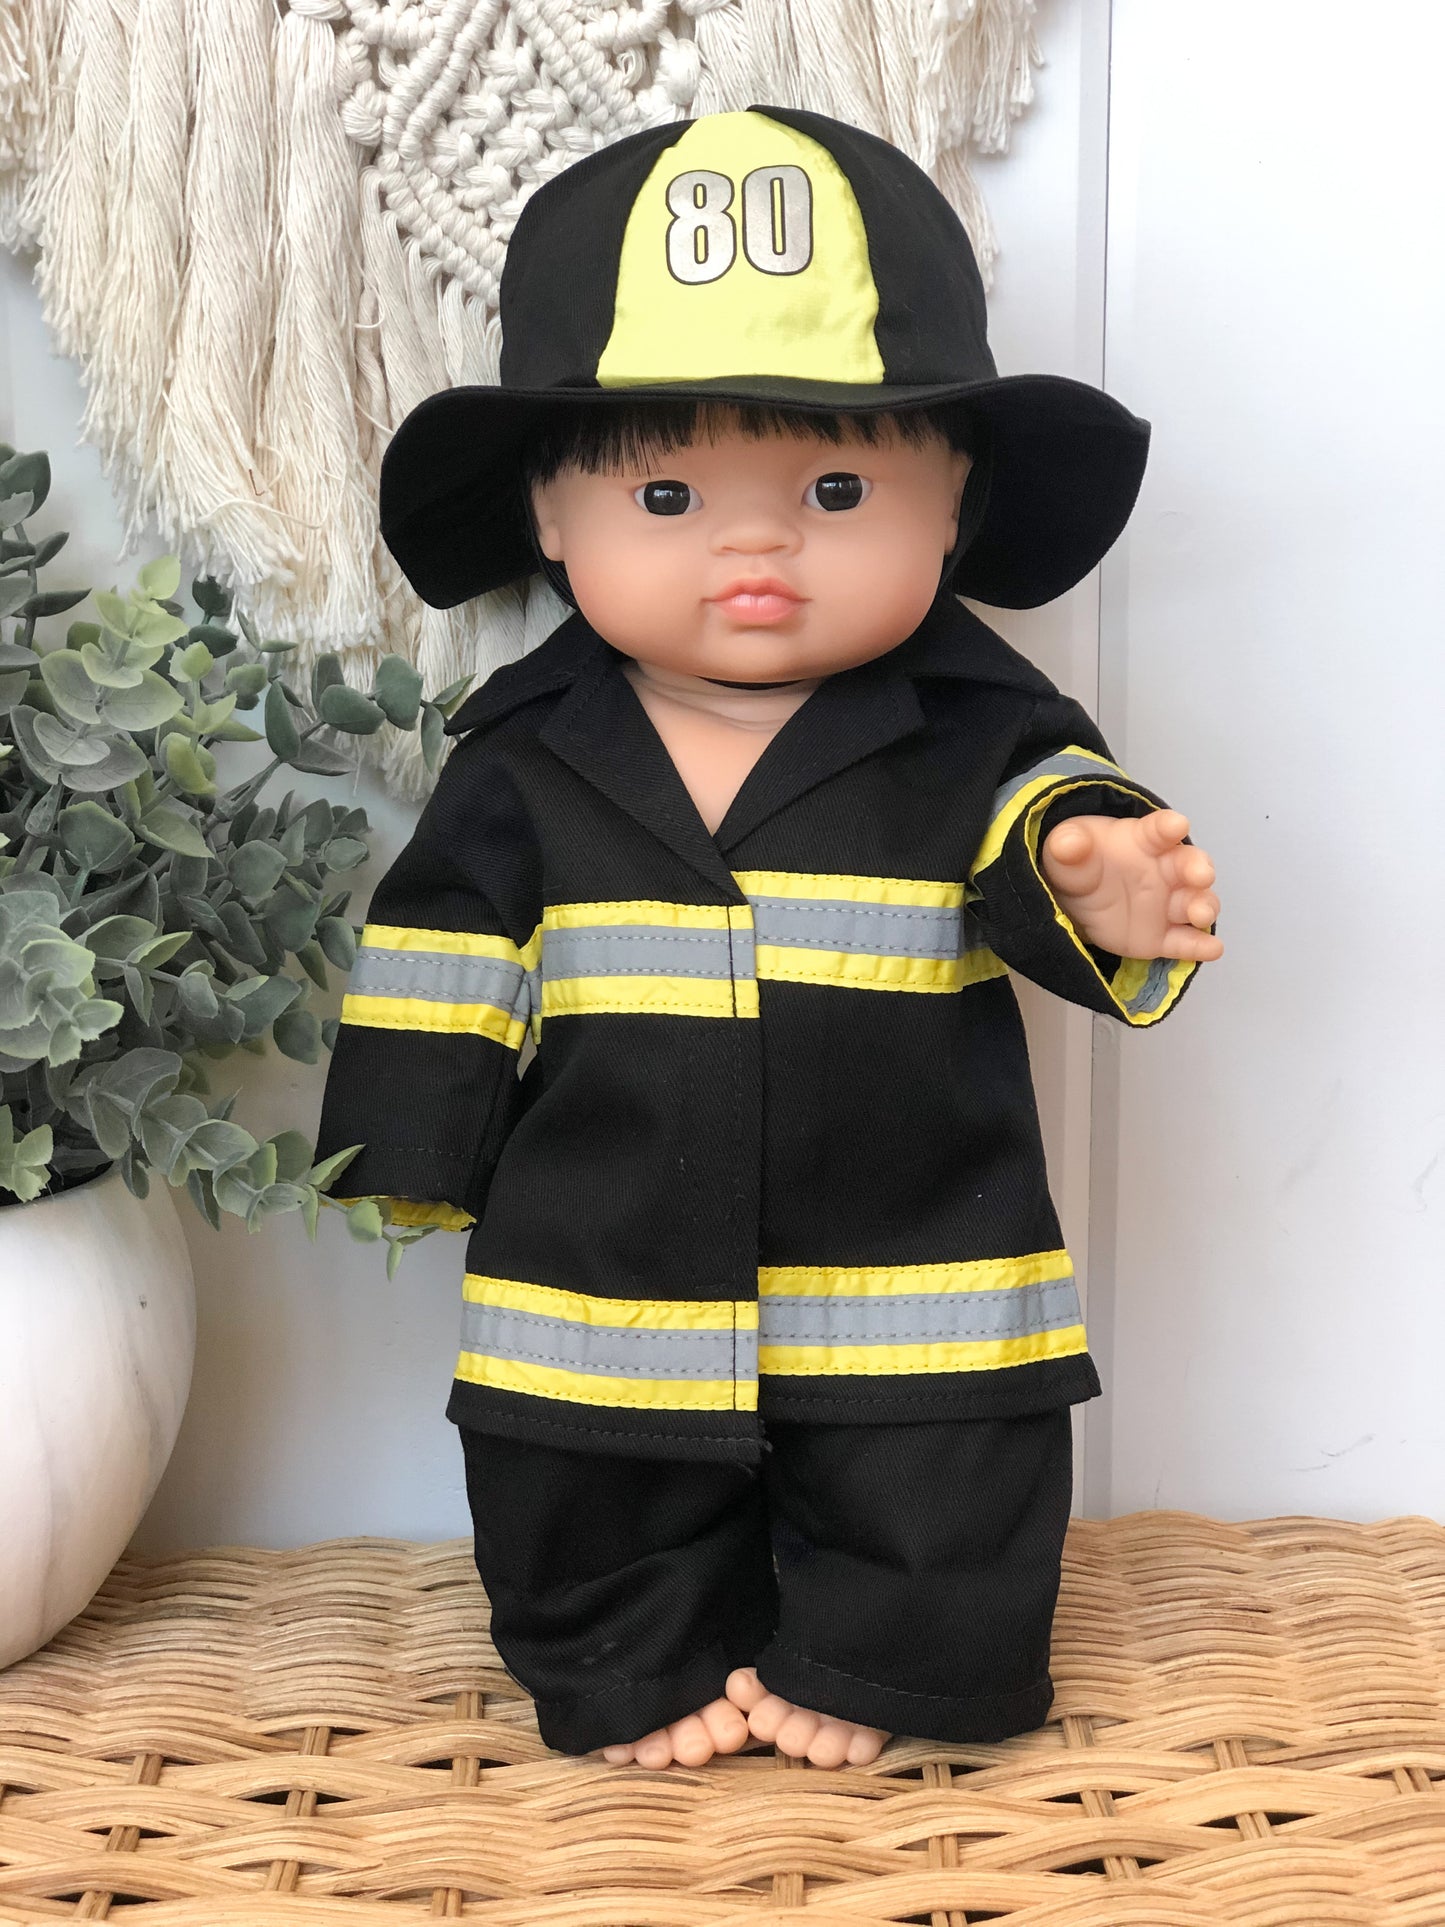 Firefighter Inspired Outfit- DOLL